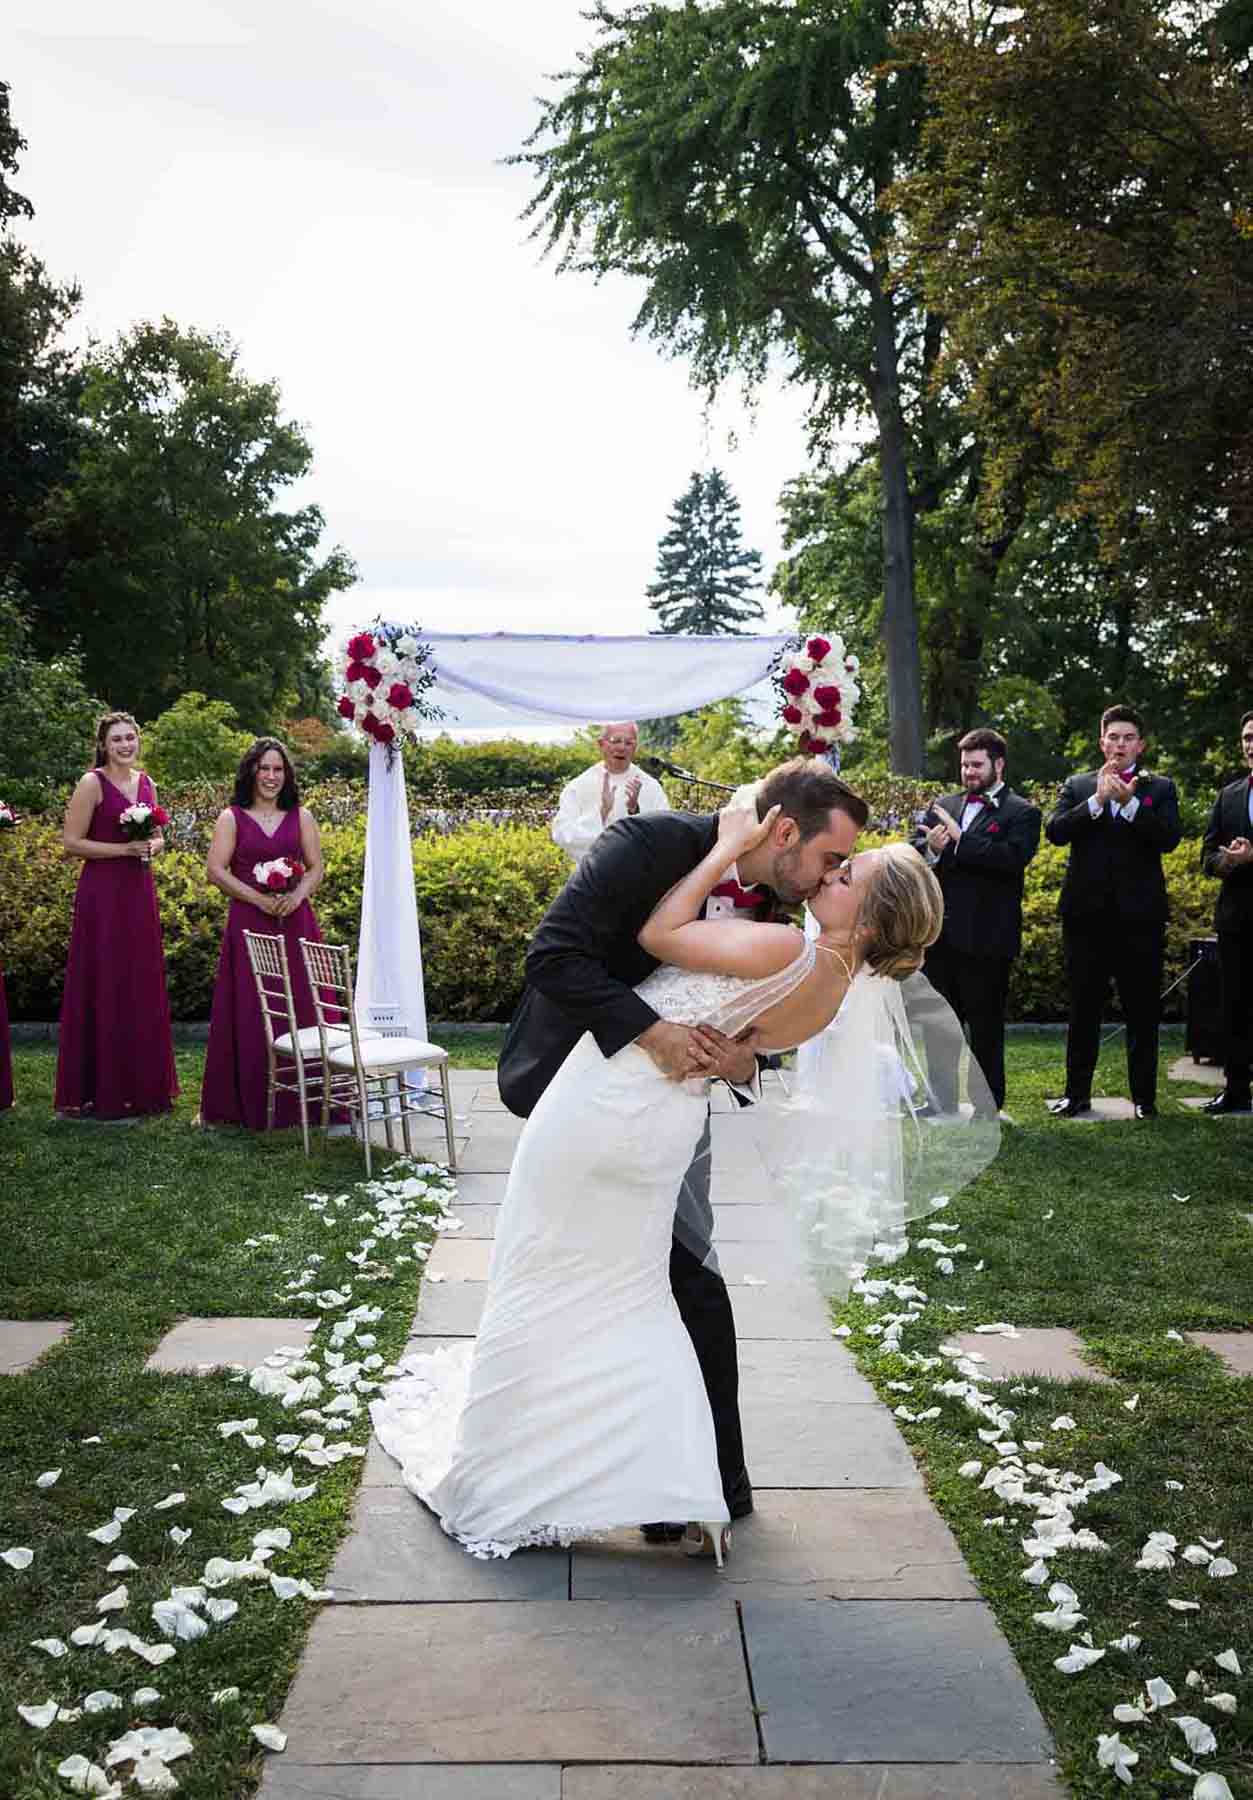 Bride and groom kissing in dramatic dip in middle of aisle after ceremony at a Briarcliff Manor wedding